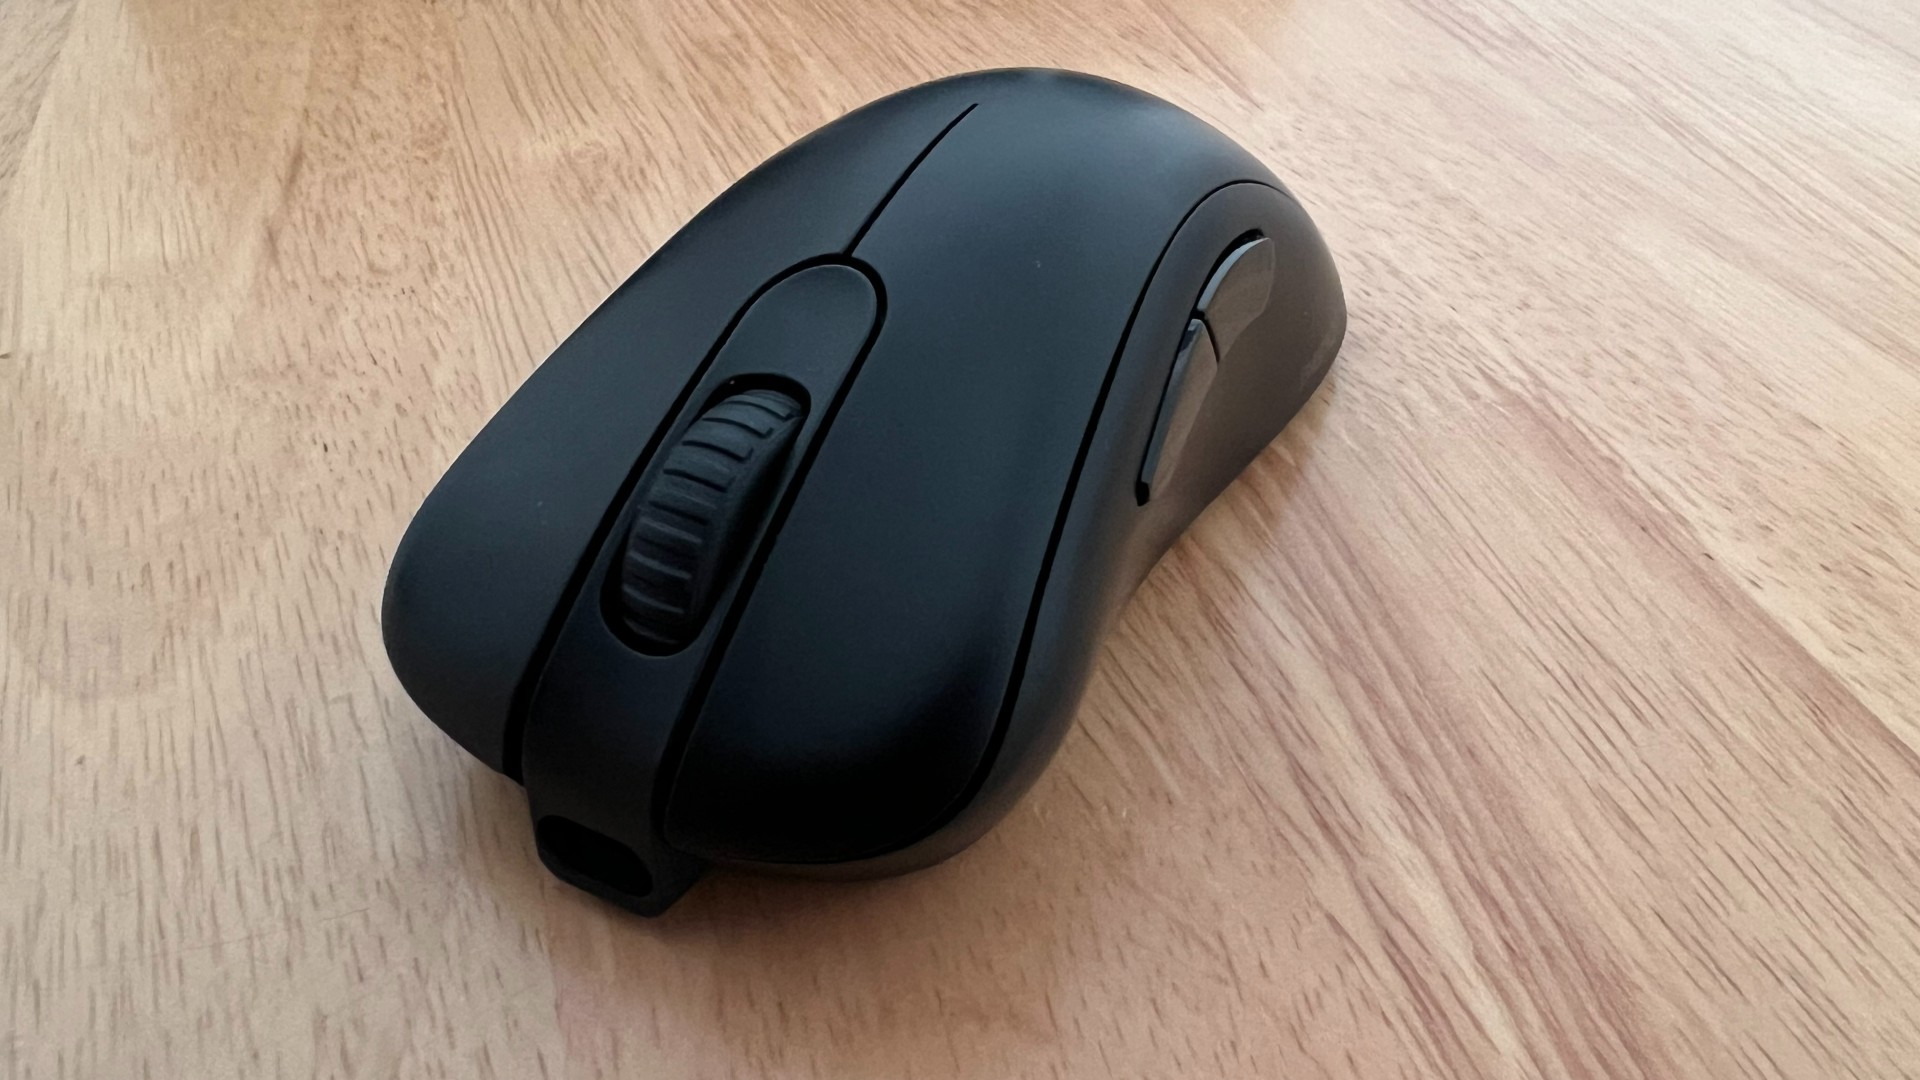 Zowie EC2-CW gaming mouse review – peak esports performance